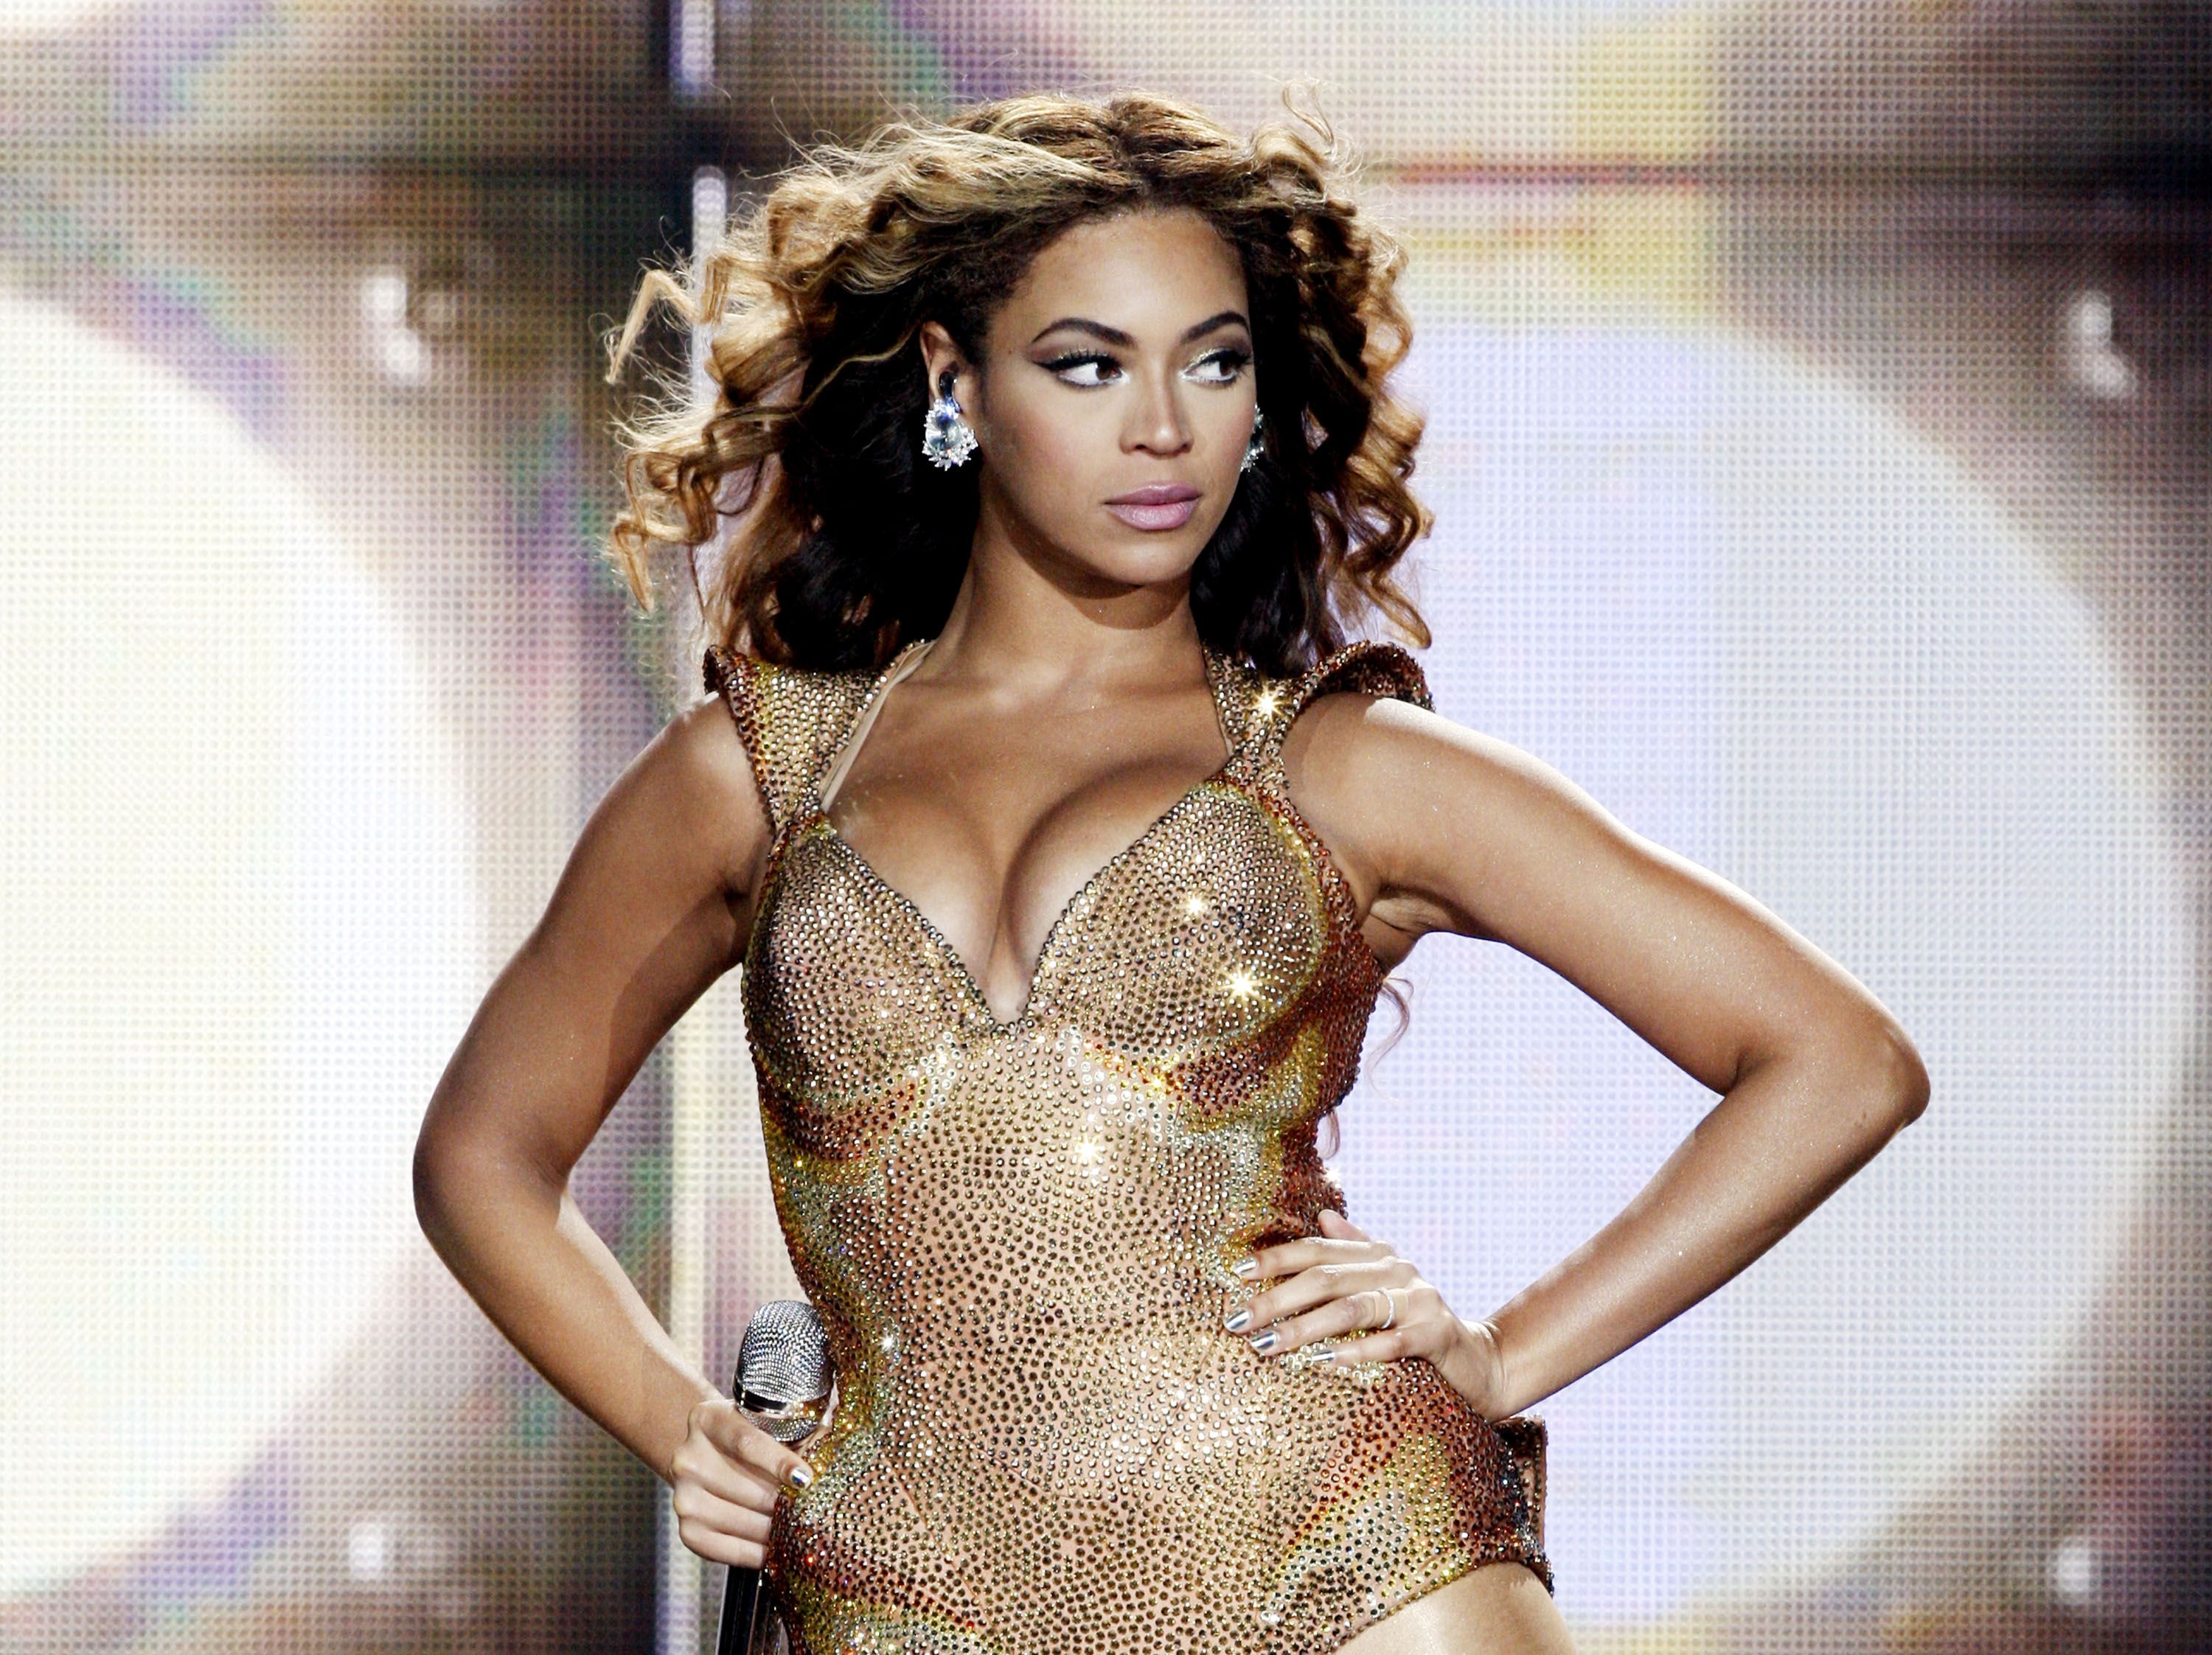 Beyoncé at the Staples Center in July 2009 in Los Angeles, California | Source: Getty Images